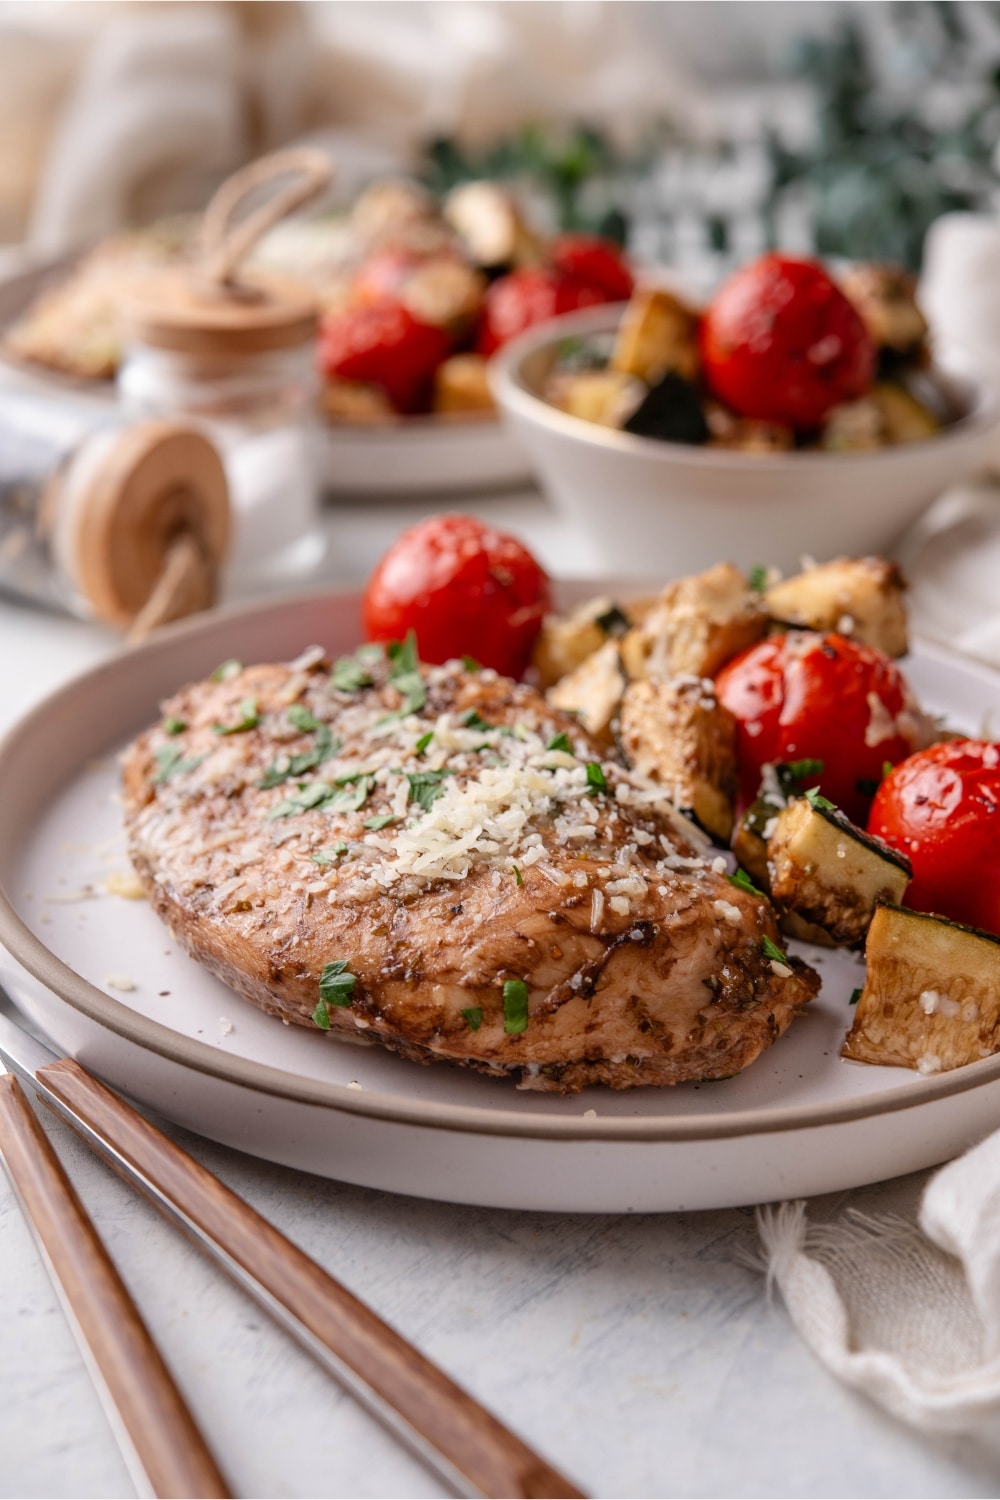 A plate of Italian baked chicken served with roasted tomatoes and zucchini.